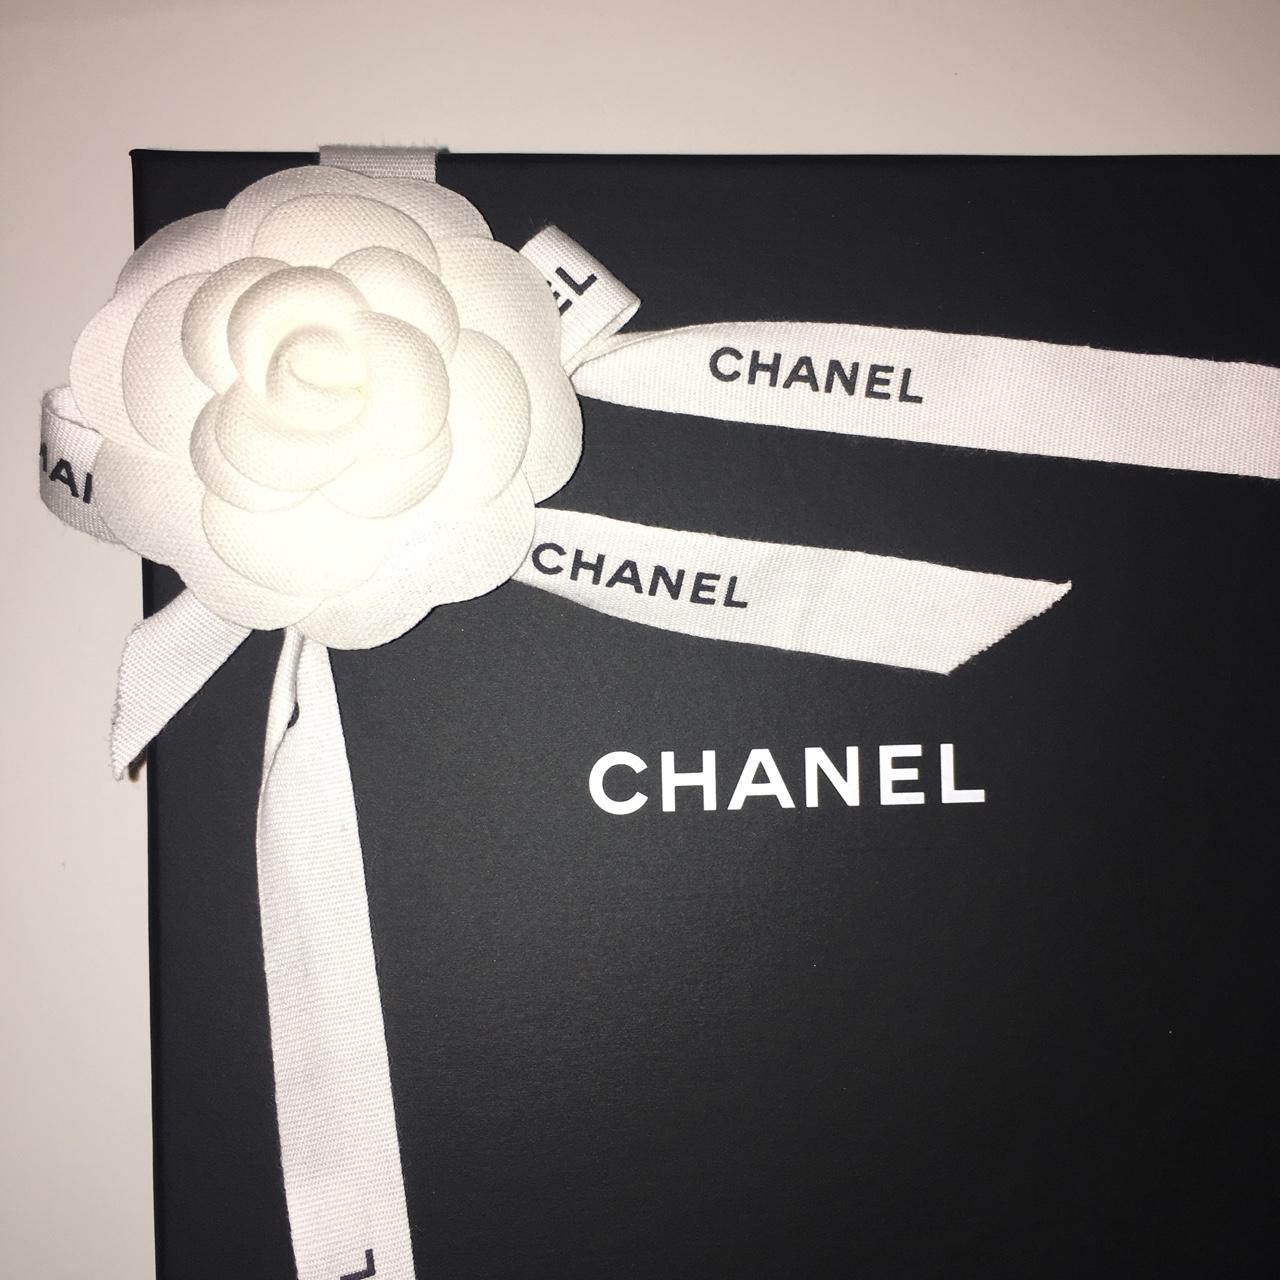 Selling this 100% authentic Chanel box with a ribbon - Depop